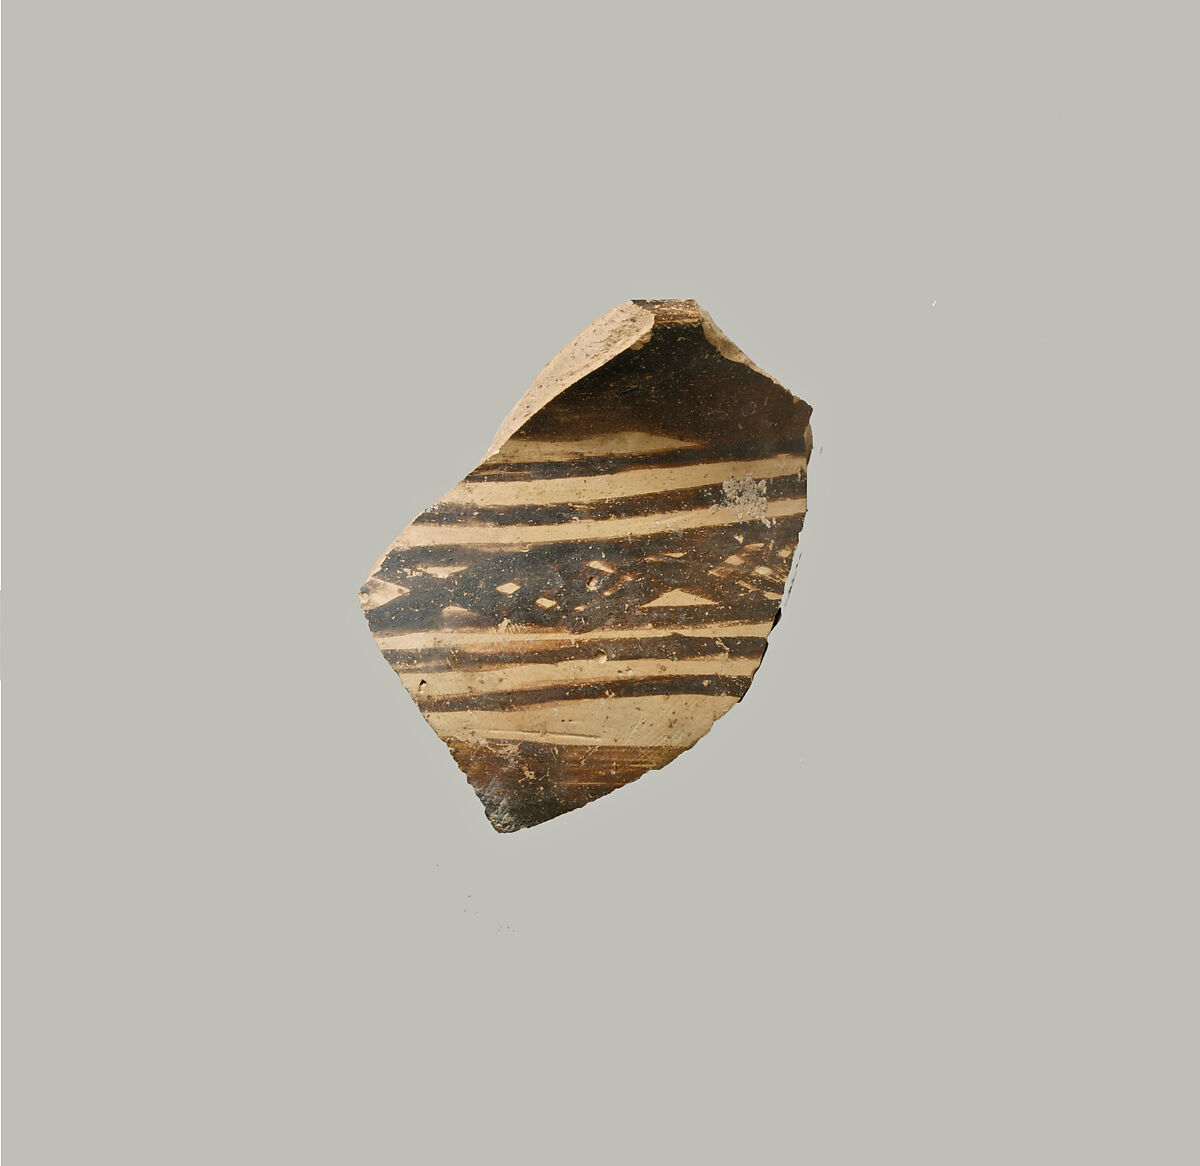 Terracotta rim fragment with horizontal bands and cross-hatching, Terracotta, Helladic 